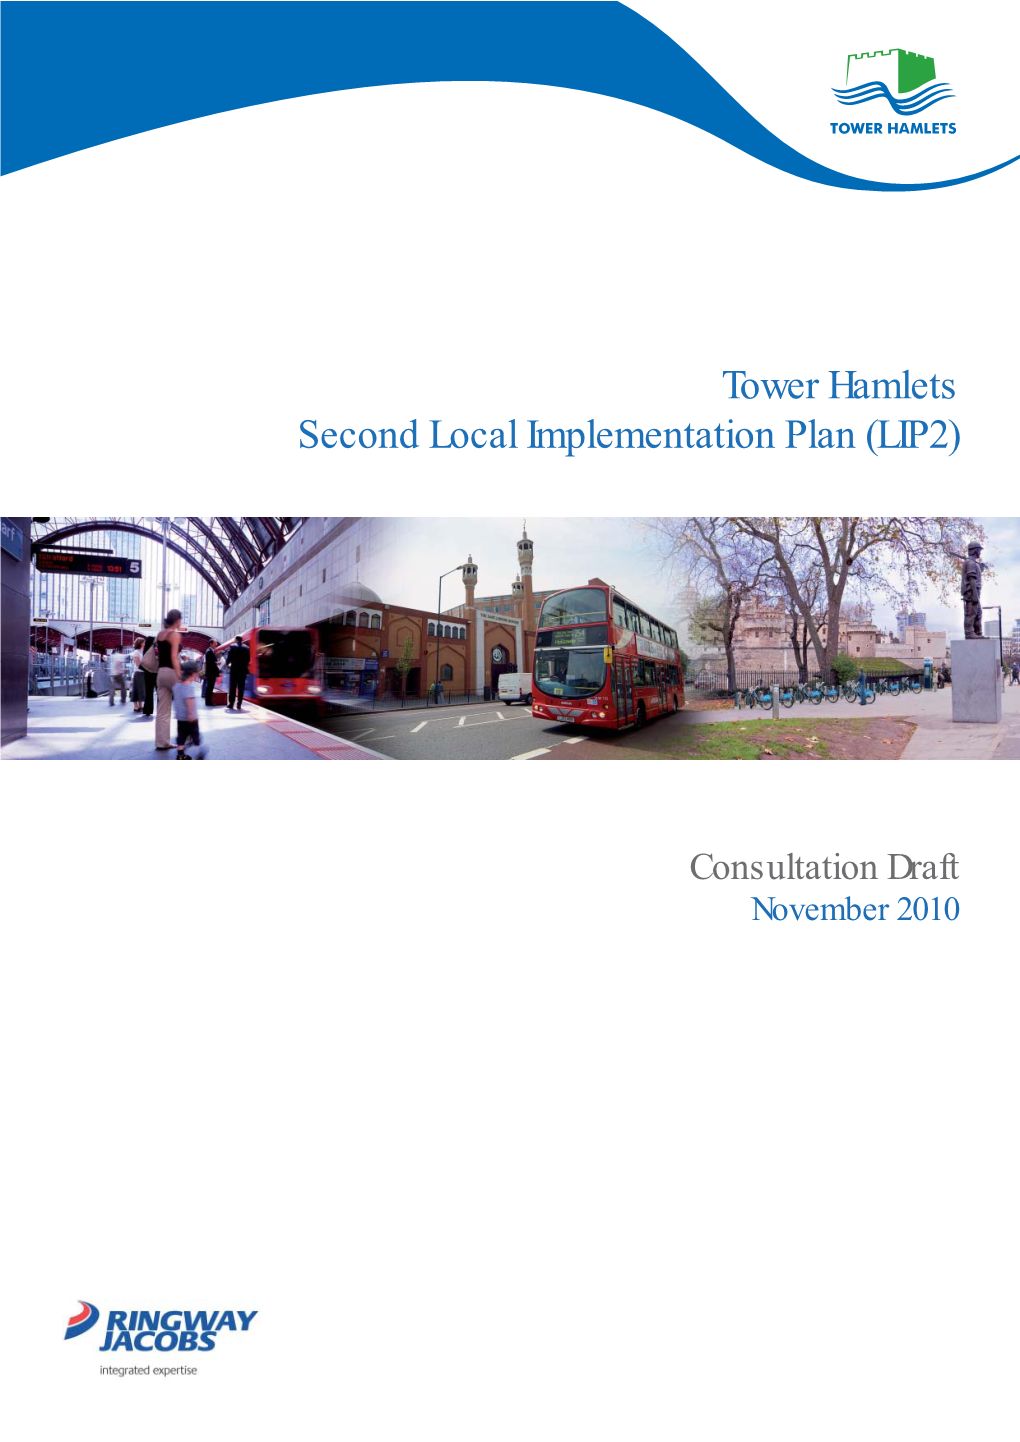 6.4 LBTH LIP2 Consultation Draft for Cabinet Nov 2010 Appx 1 PDF 3 MB